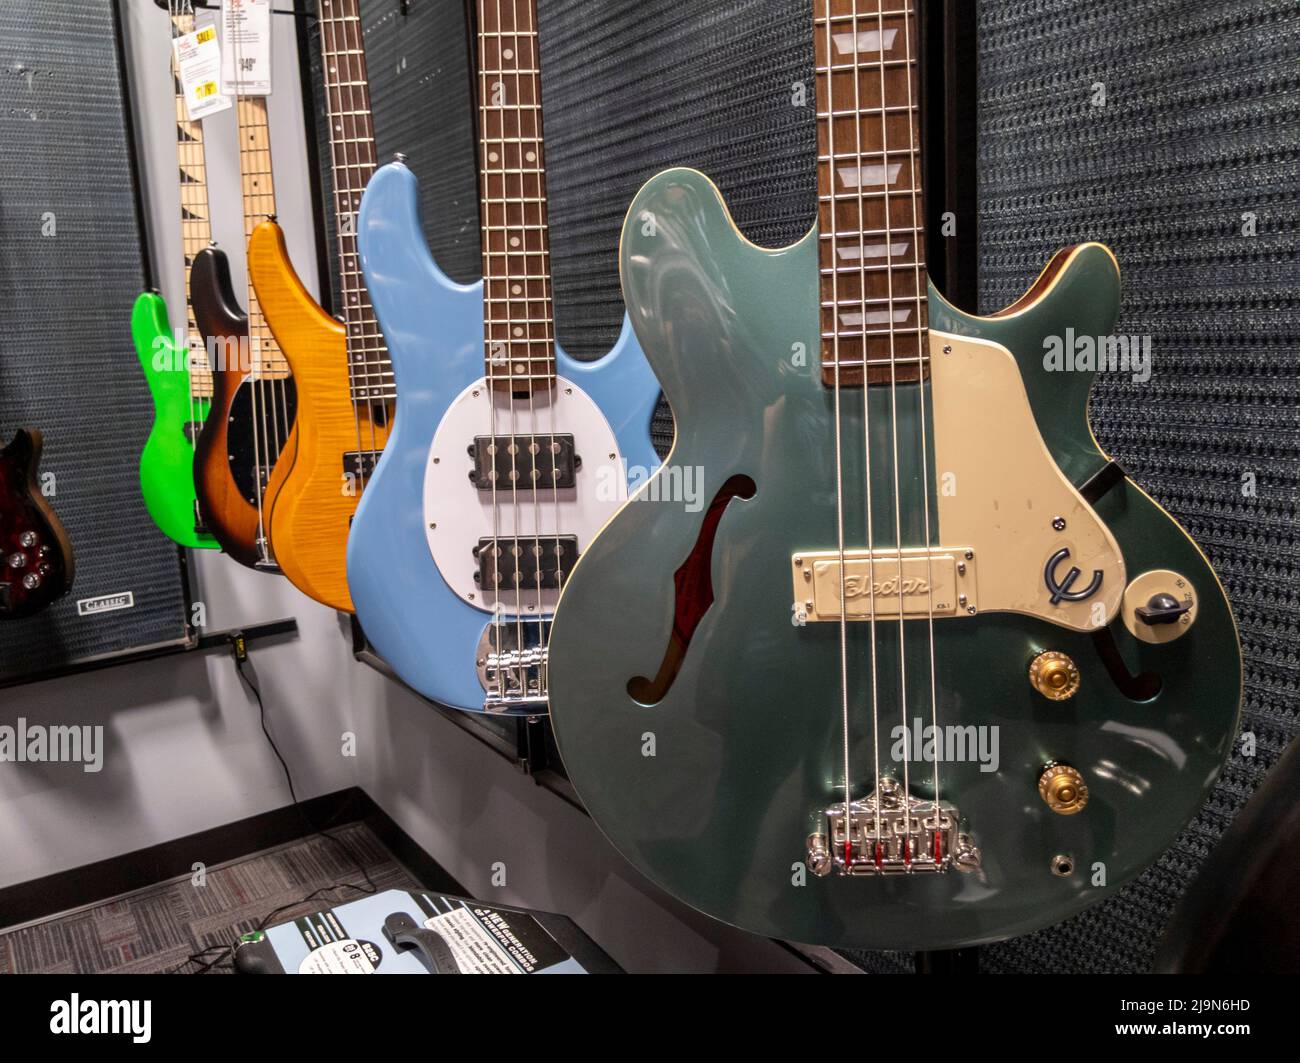 Lynnwood, WA USA - circa May 2022: View of various bass guitars for sale inside a Guitar Center musical instrument store. Stock Photo